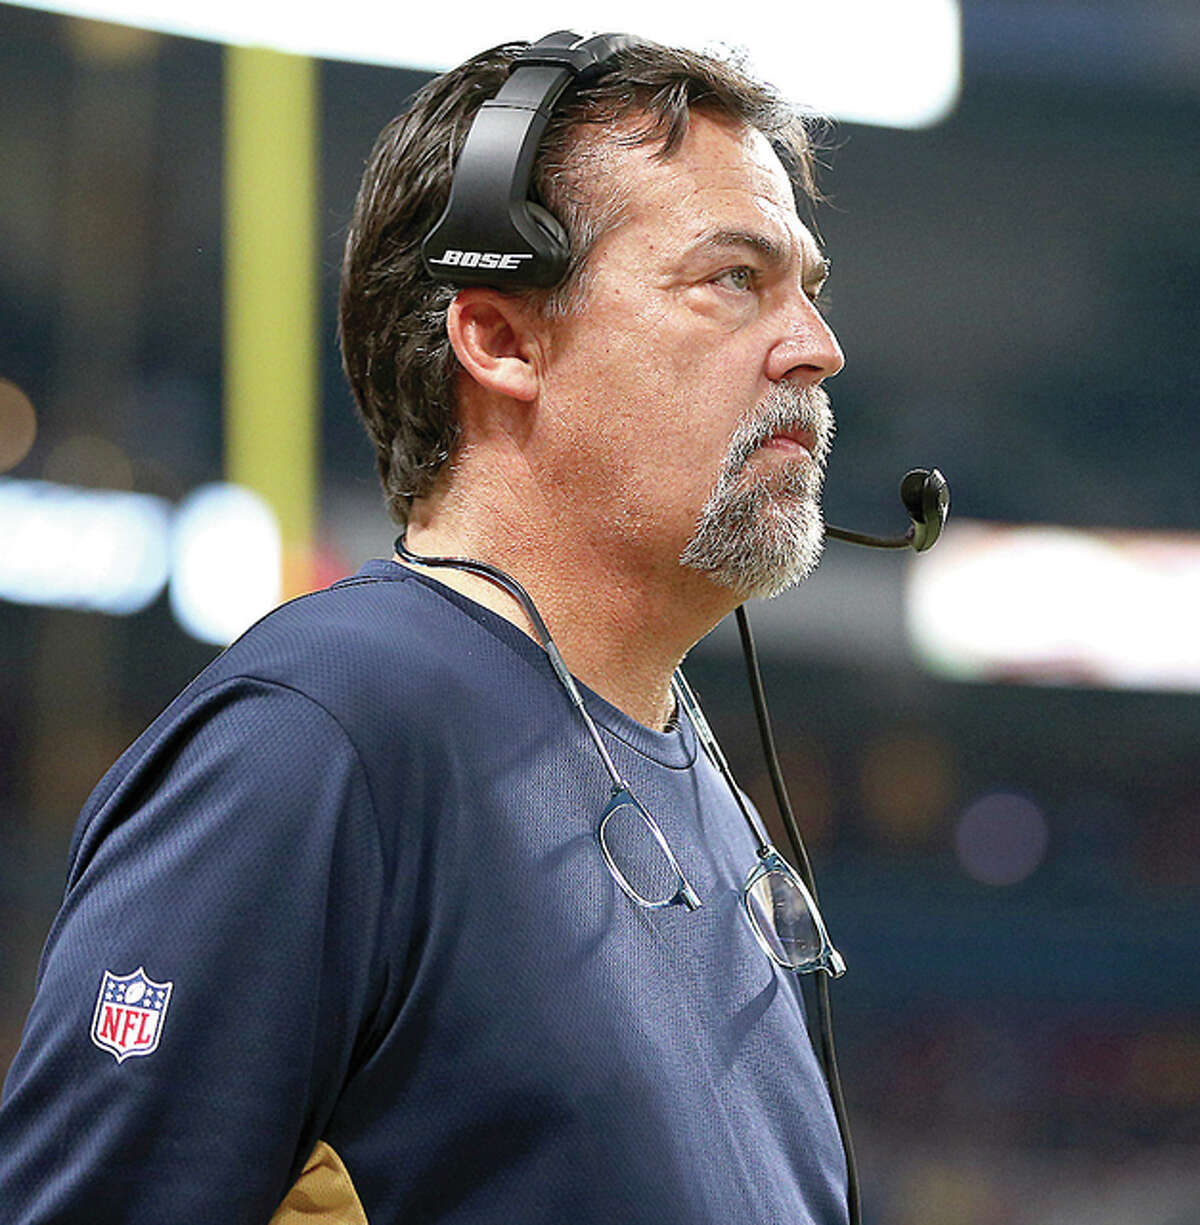 Jeff Fisher’s Rams will take on the Tampa Bay Buccaneers Thursday at the Edward Jones Dome in what could be the team’s final game in St. Louis.